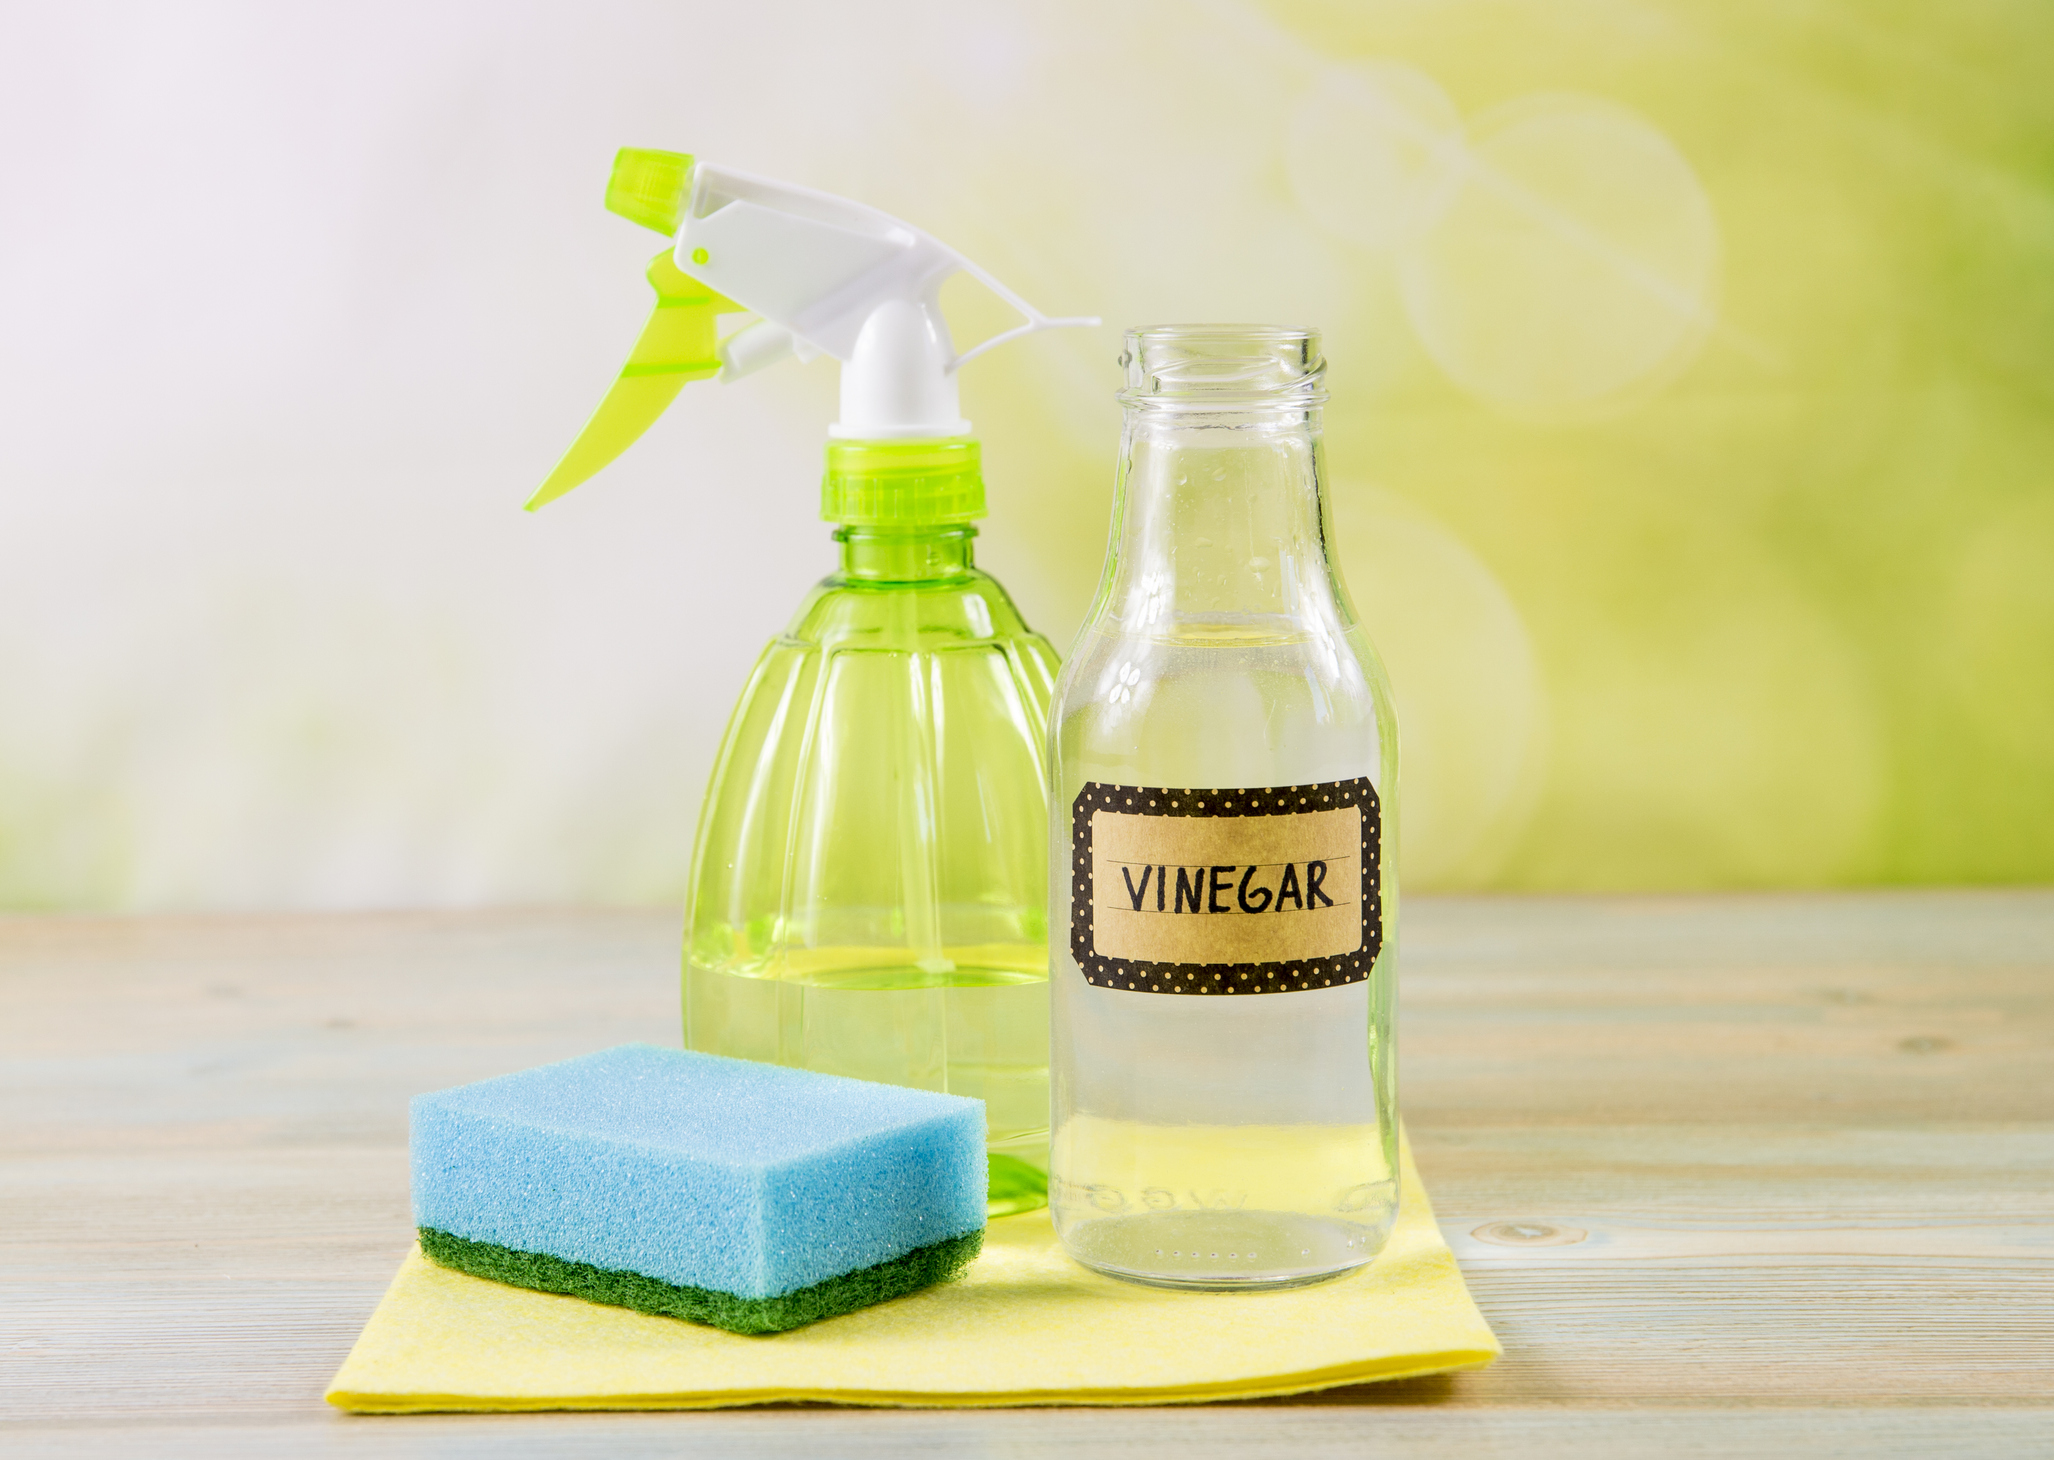 Cleaning Your Kitchen With Vinegar